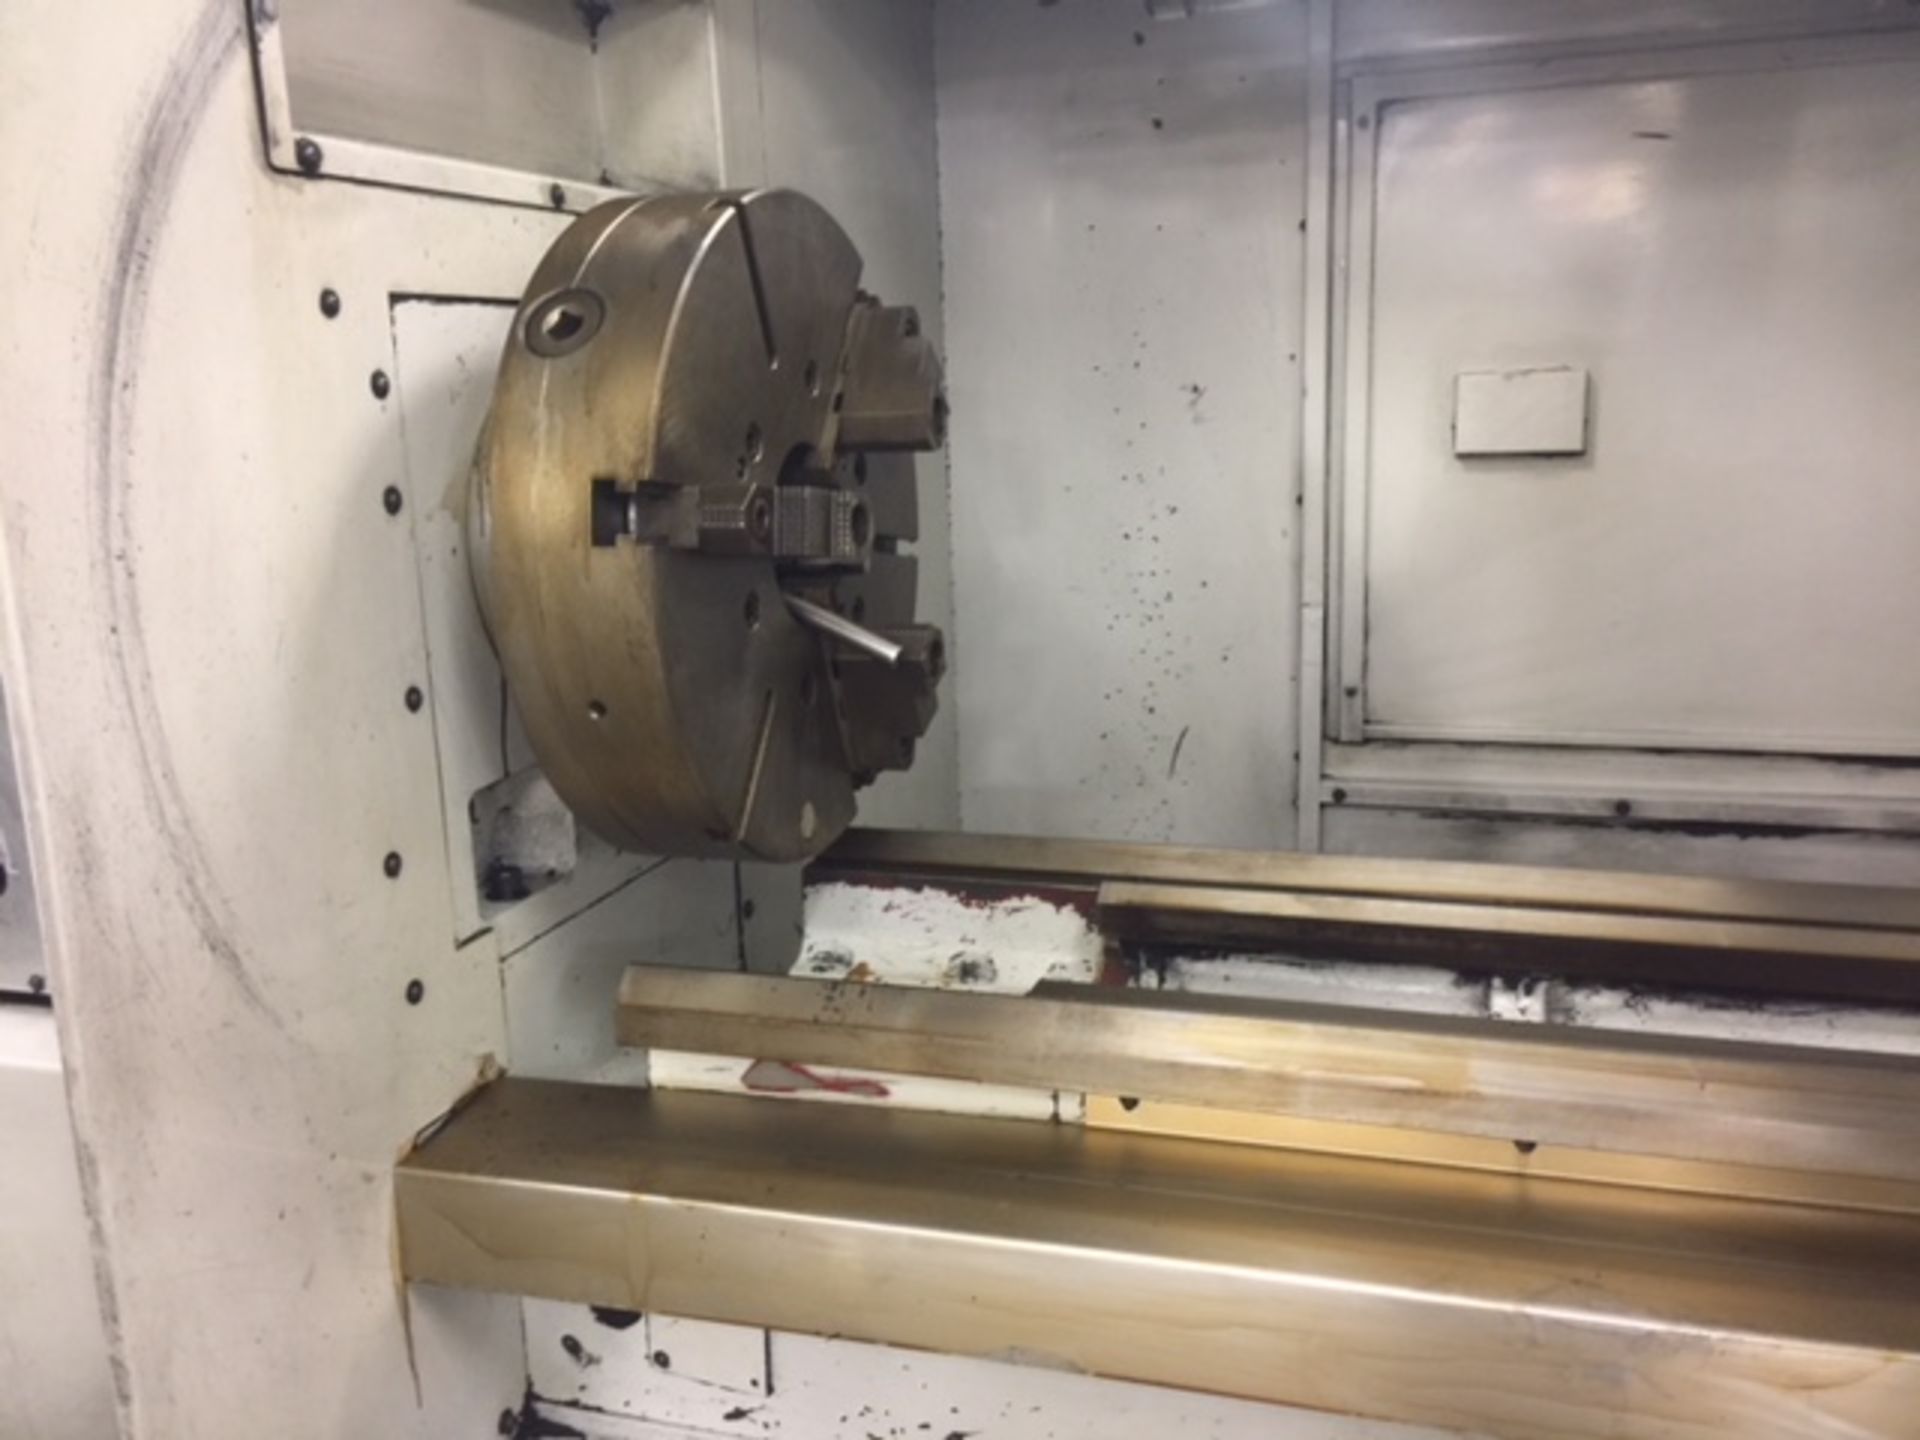 24" x 40" Acra Model FEL-24x40-ENC CNC Lathe with C Axis Milling - Image 7 of 10